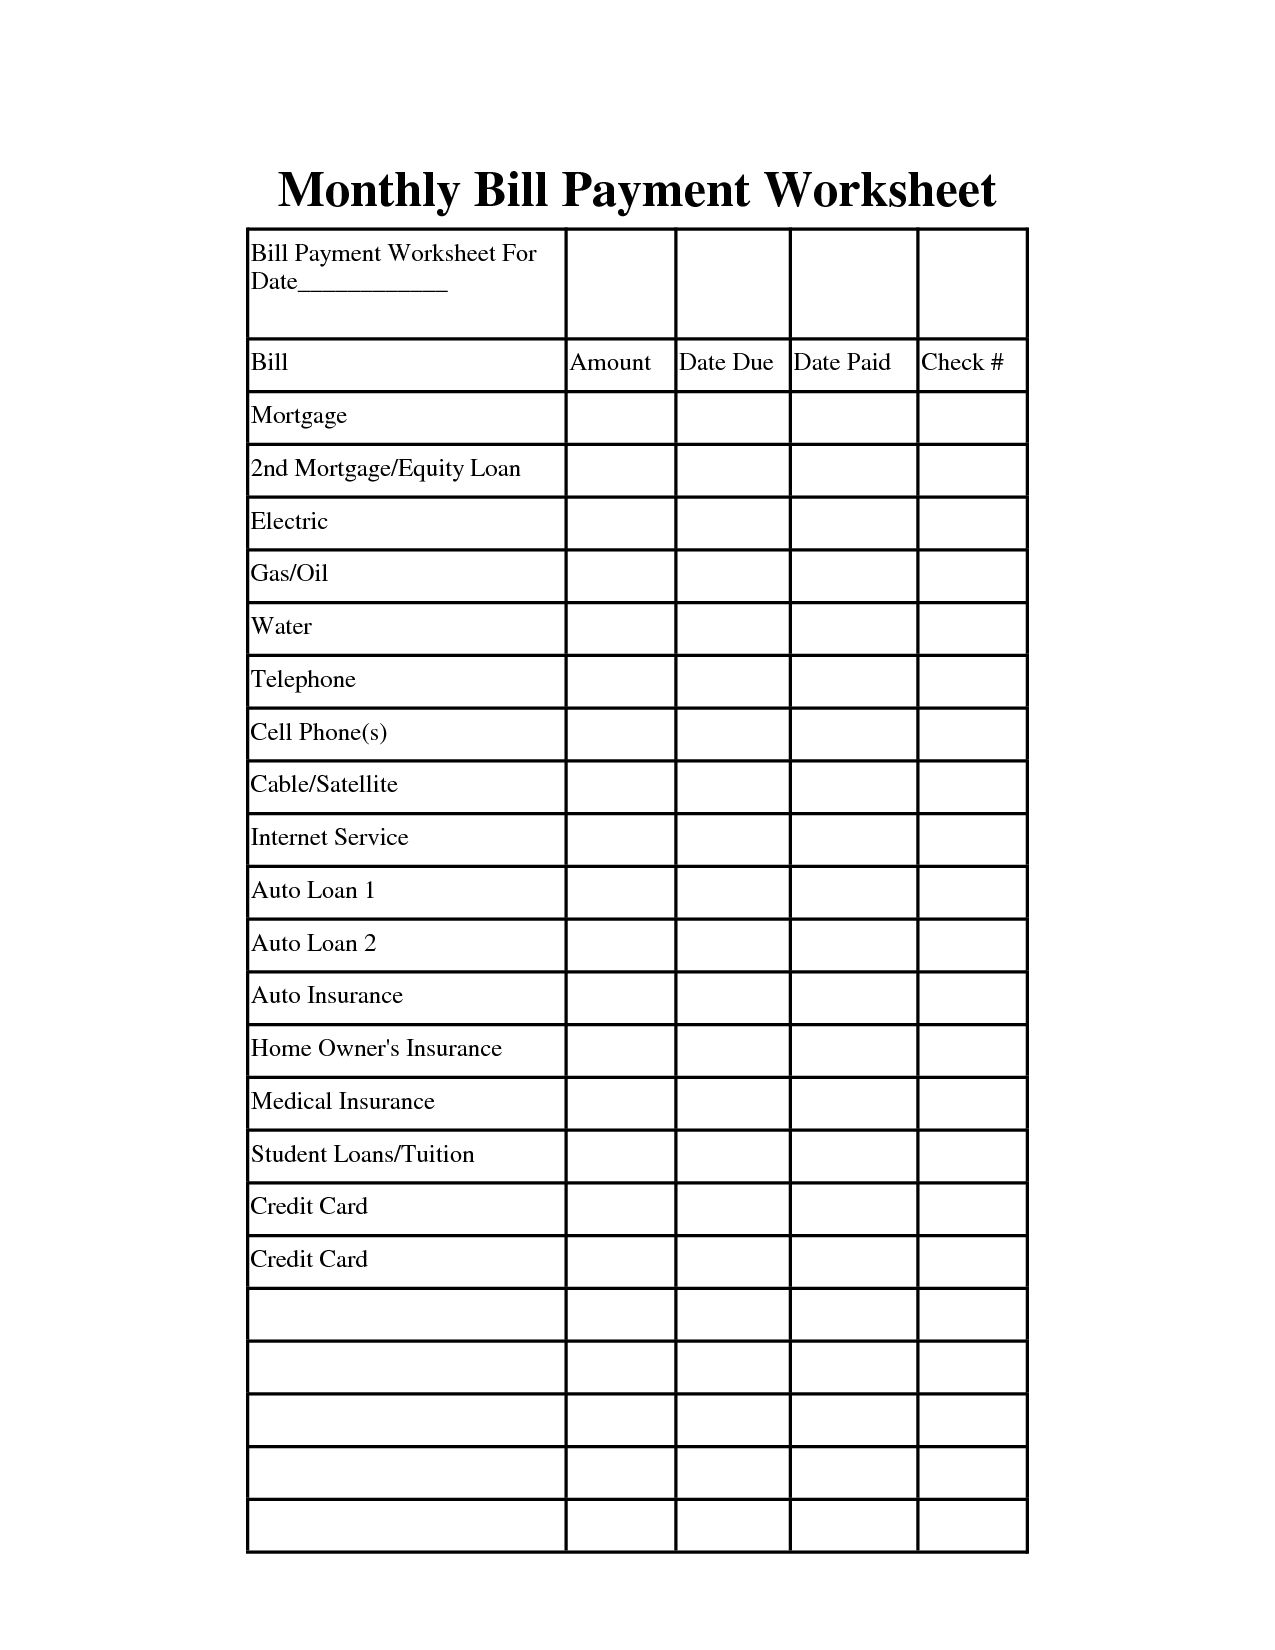 Bill Chart Template - Kubre.euforic.co-Free Printable Monthly Bill throughout Monthly Bill Payment Blank Worksheet